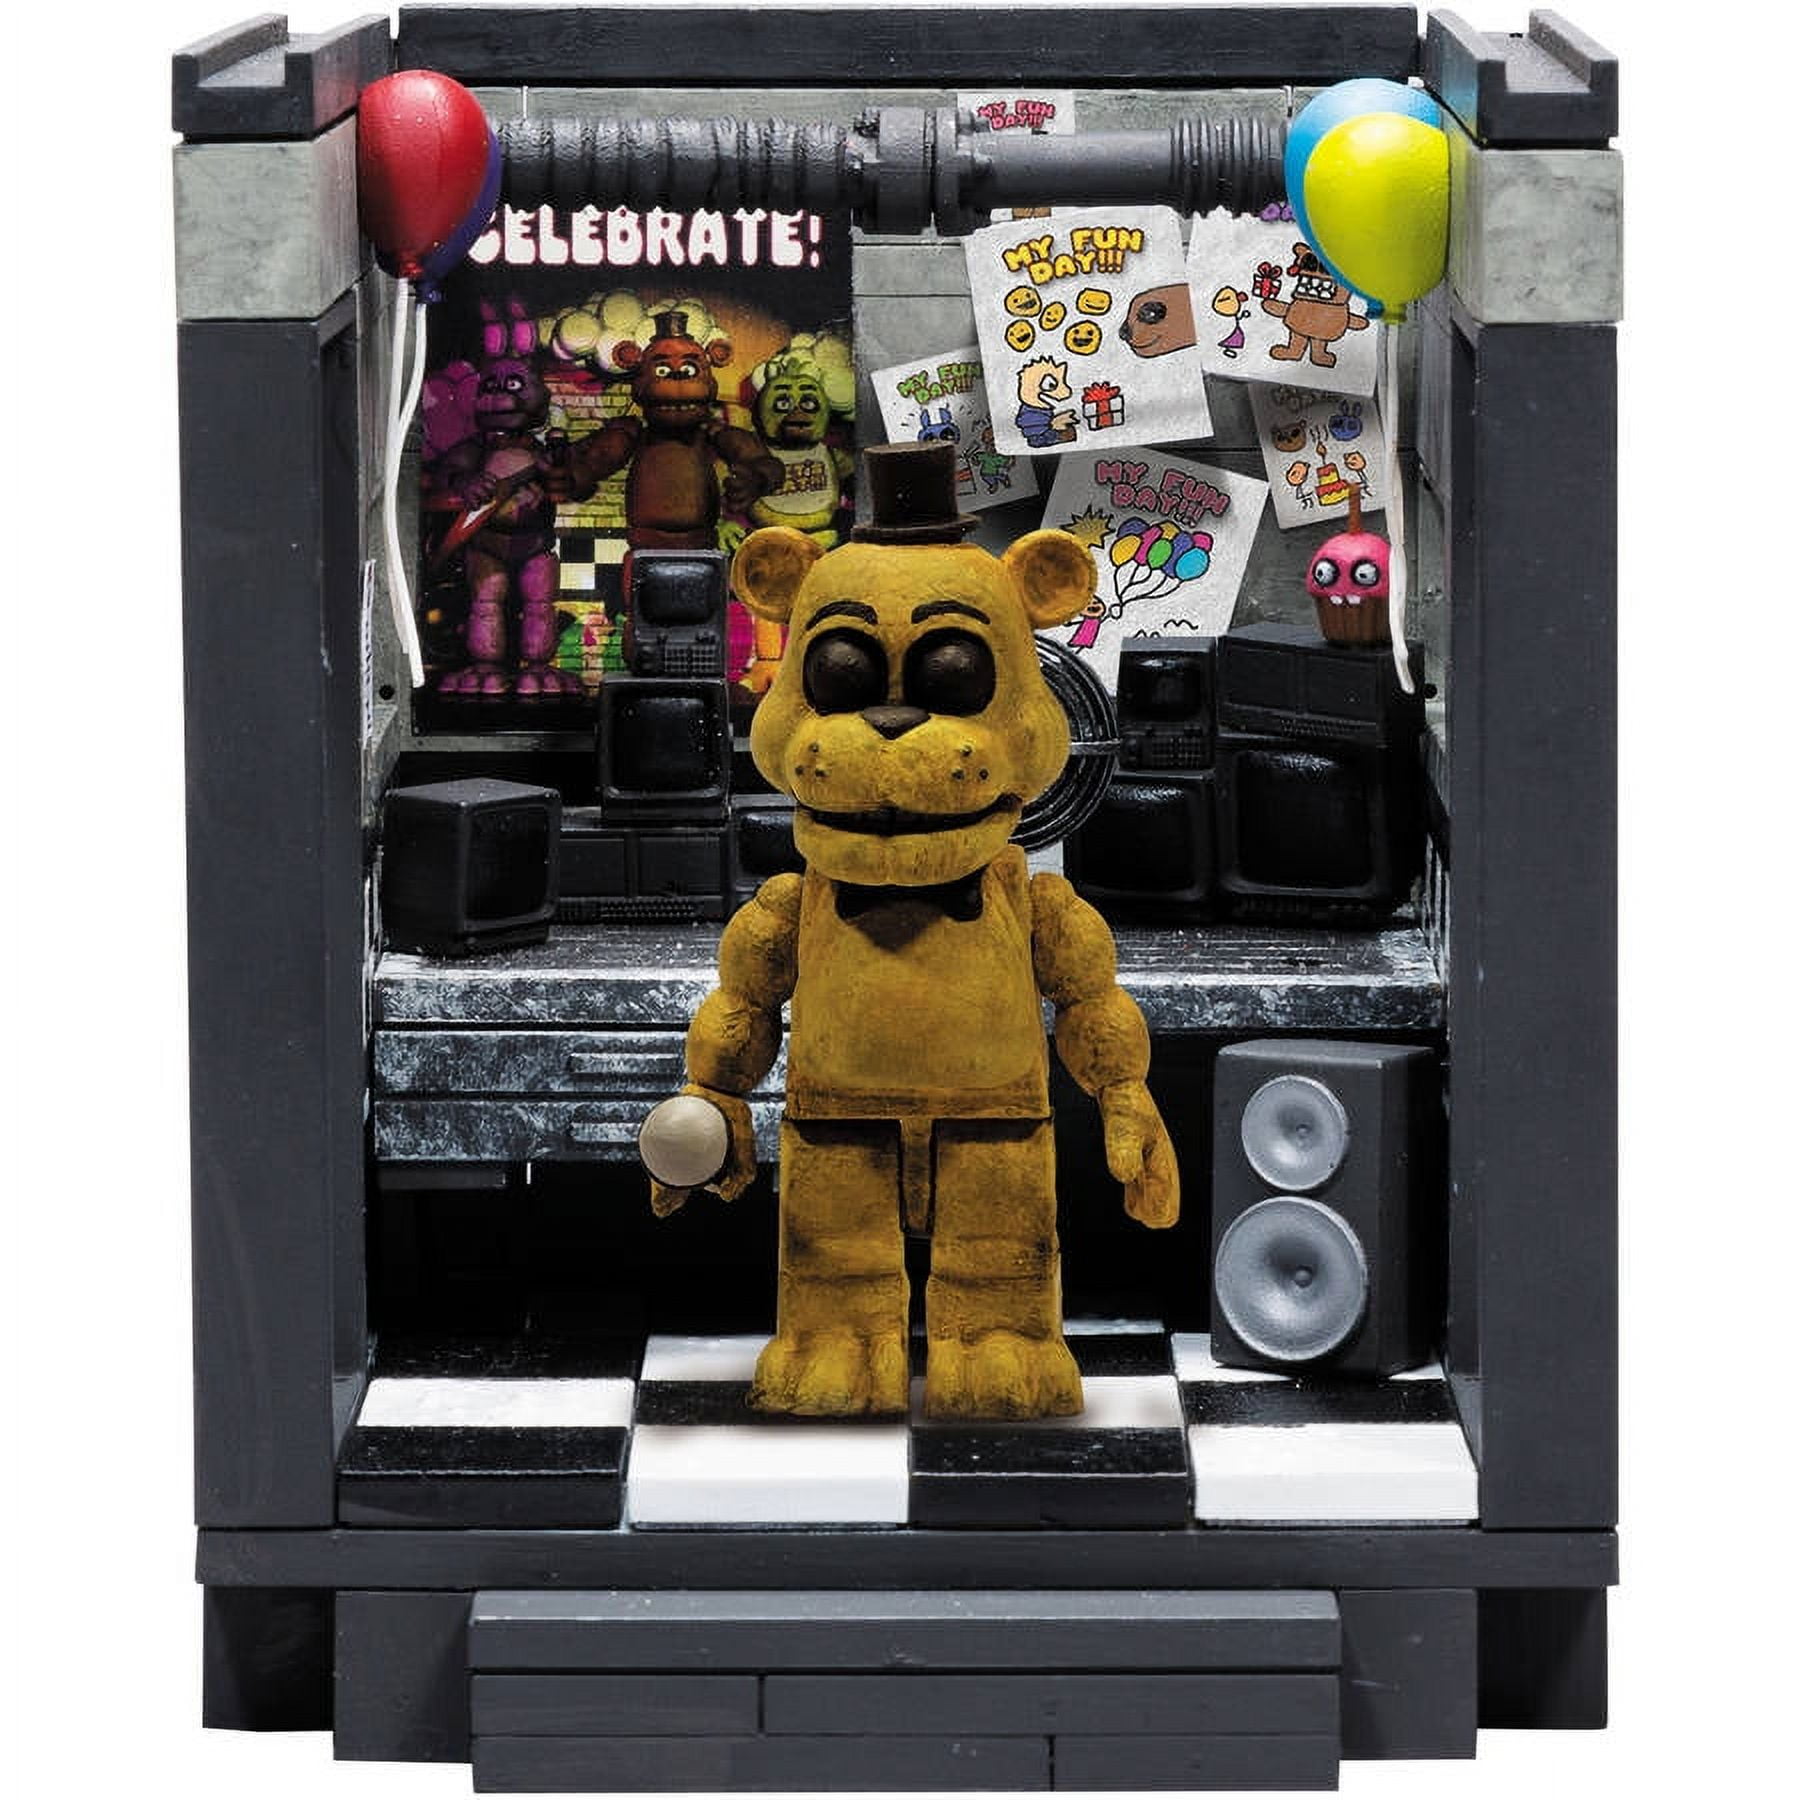 Five Nights at Freddy's, The Office Action Figure Set, 119 Pieces